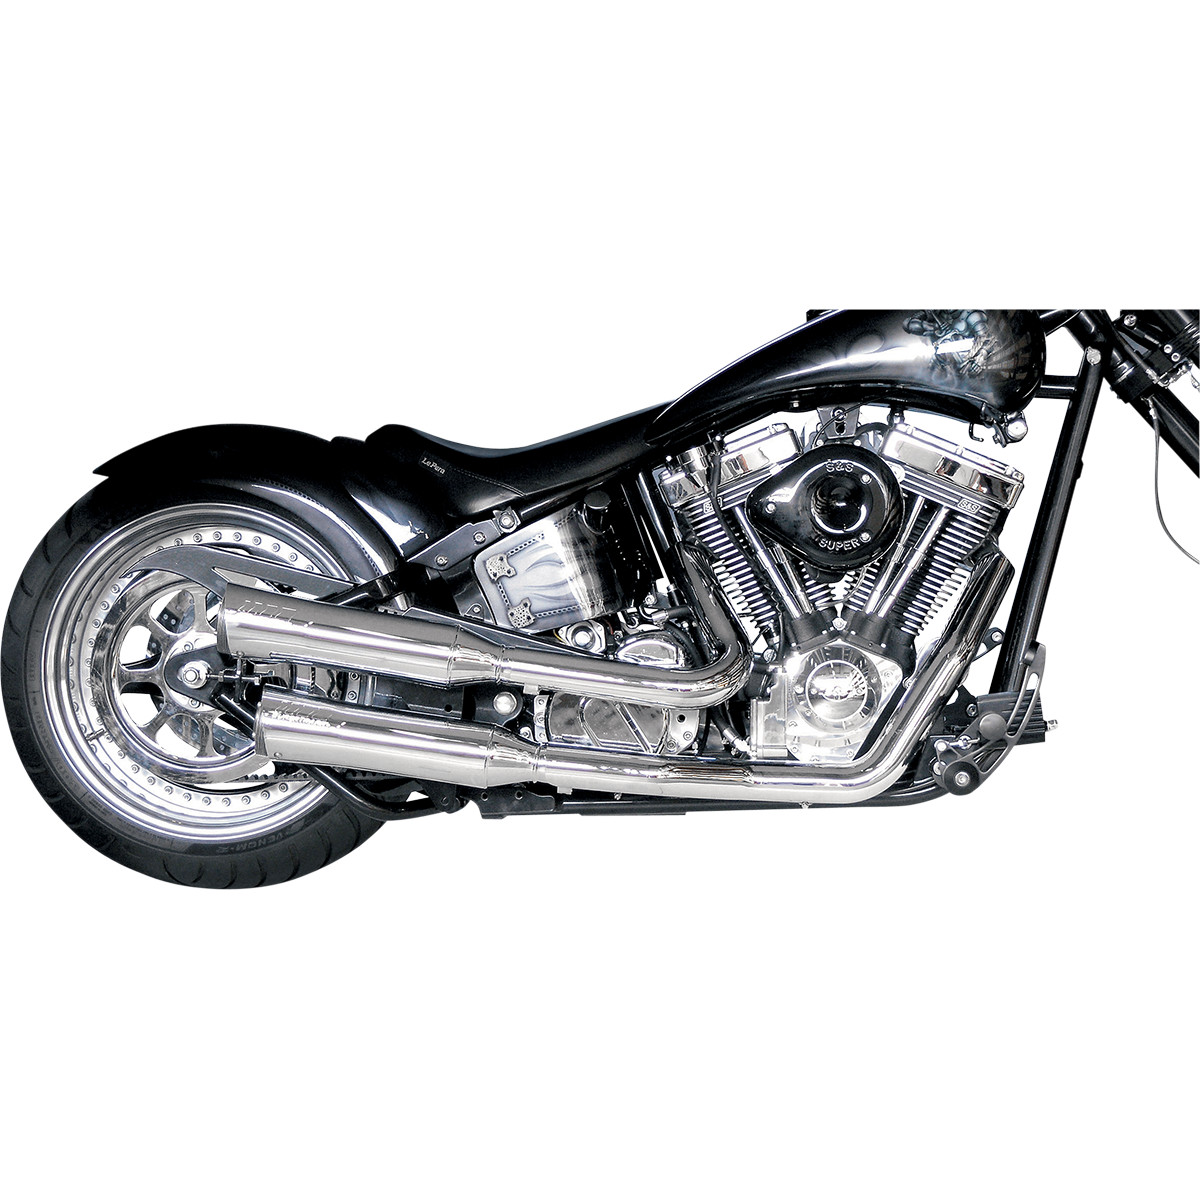 H/D EXHAUST SYSTEM CUSTOM FATSHOTS 2-2 CHROME (330 WIDE TIRE/RIGHT SIDE DRIVE)